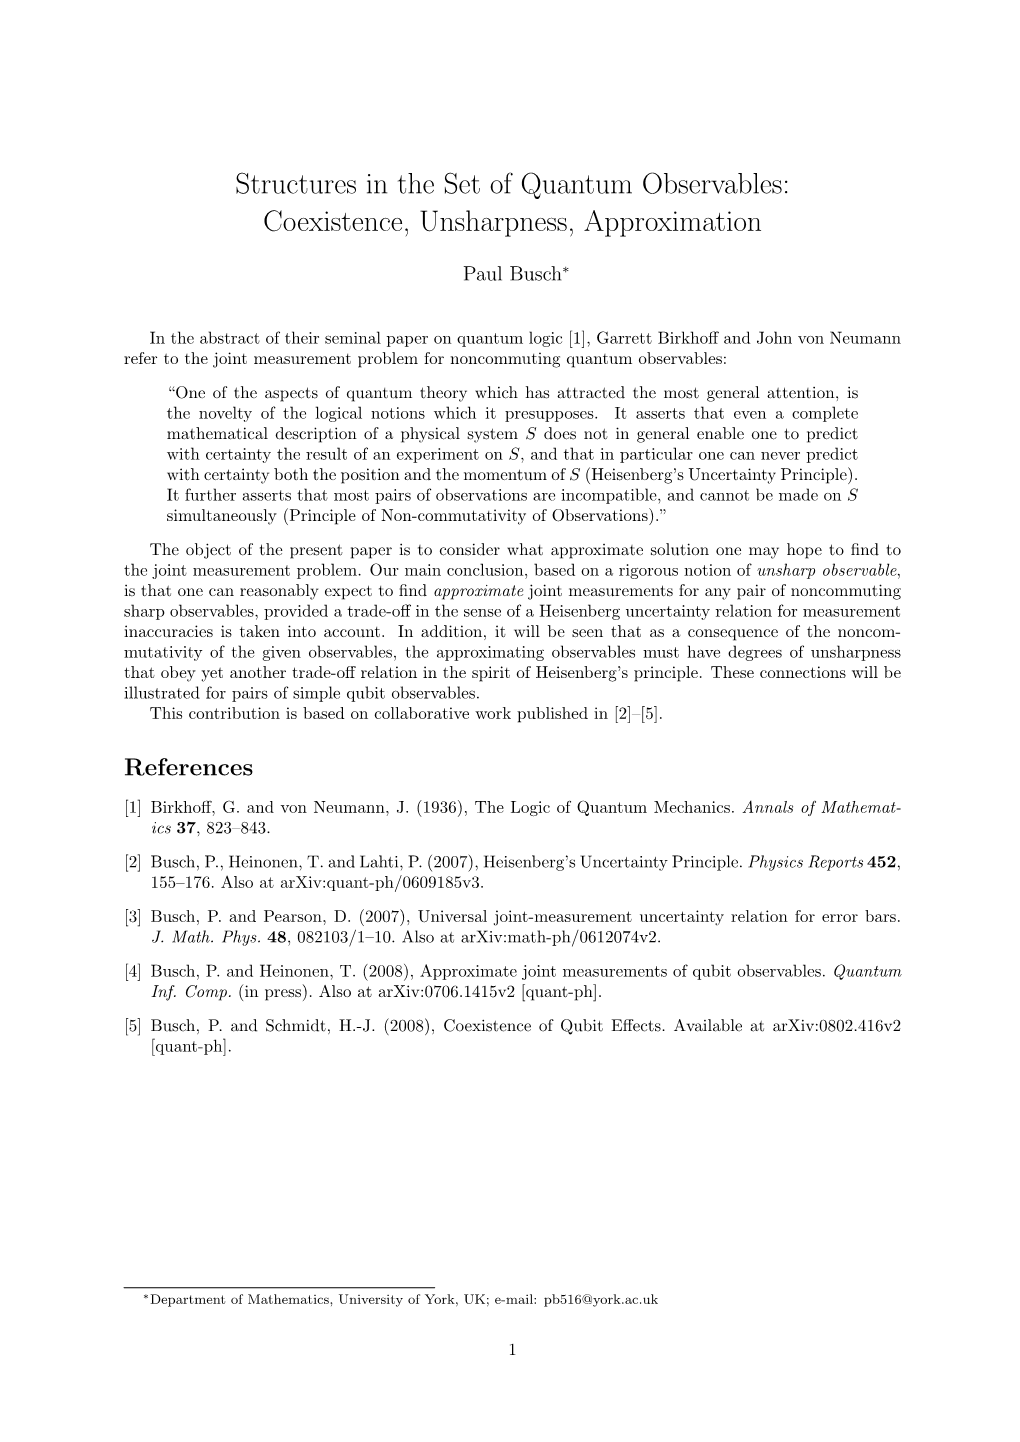 Structures in the Set of Quantum Observables: Coexistence, Unsharpness, Approximation